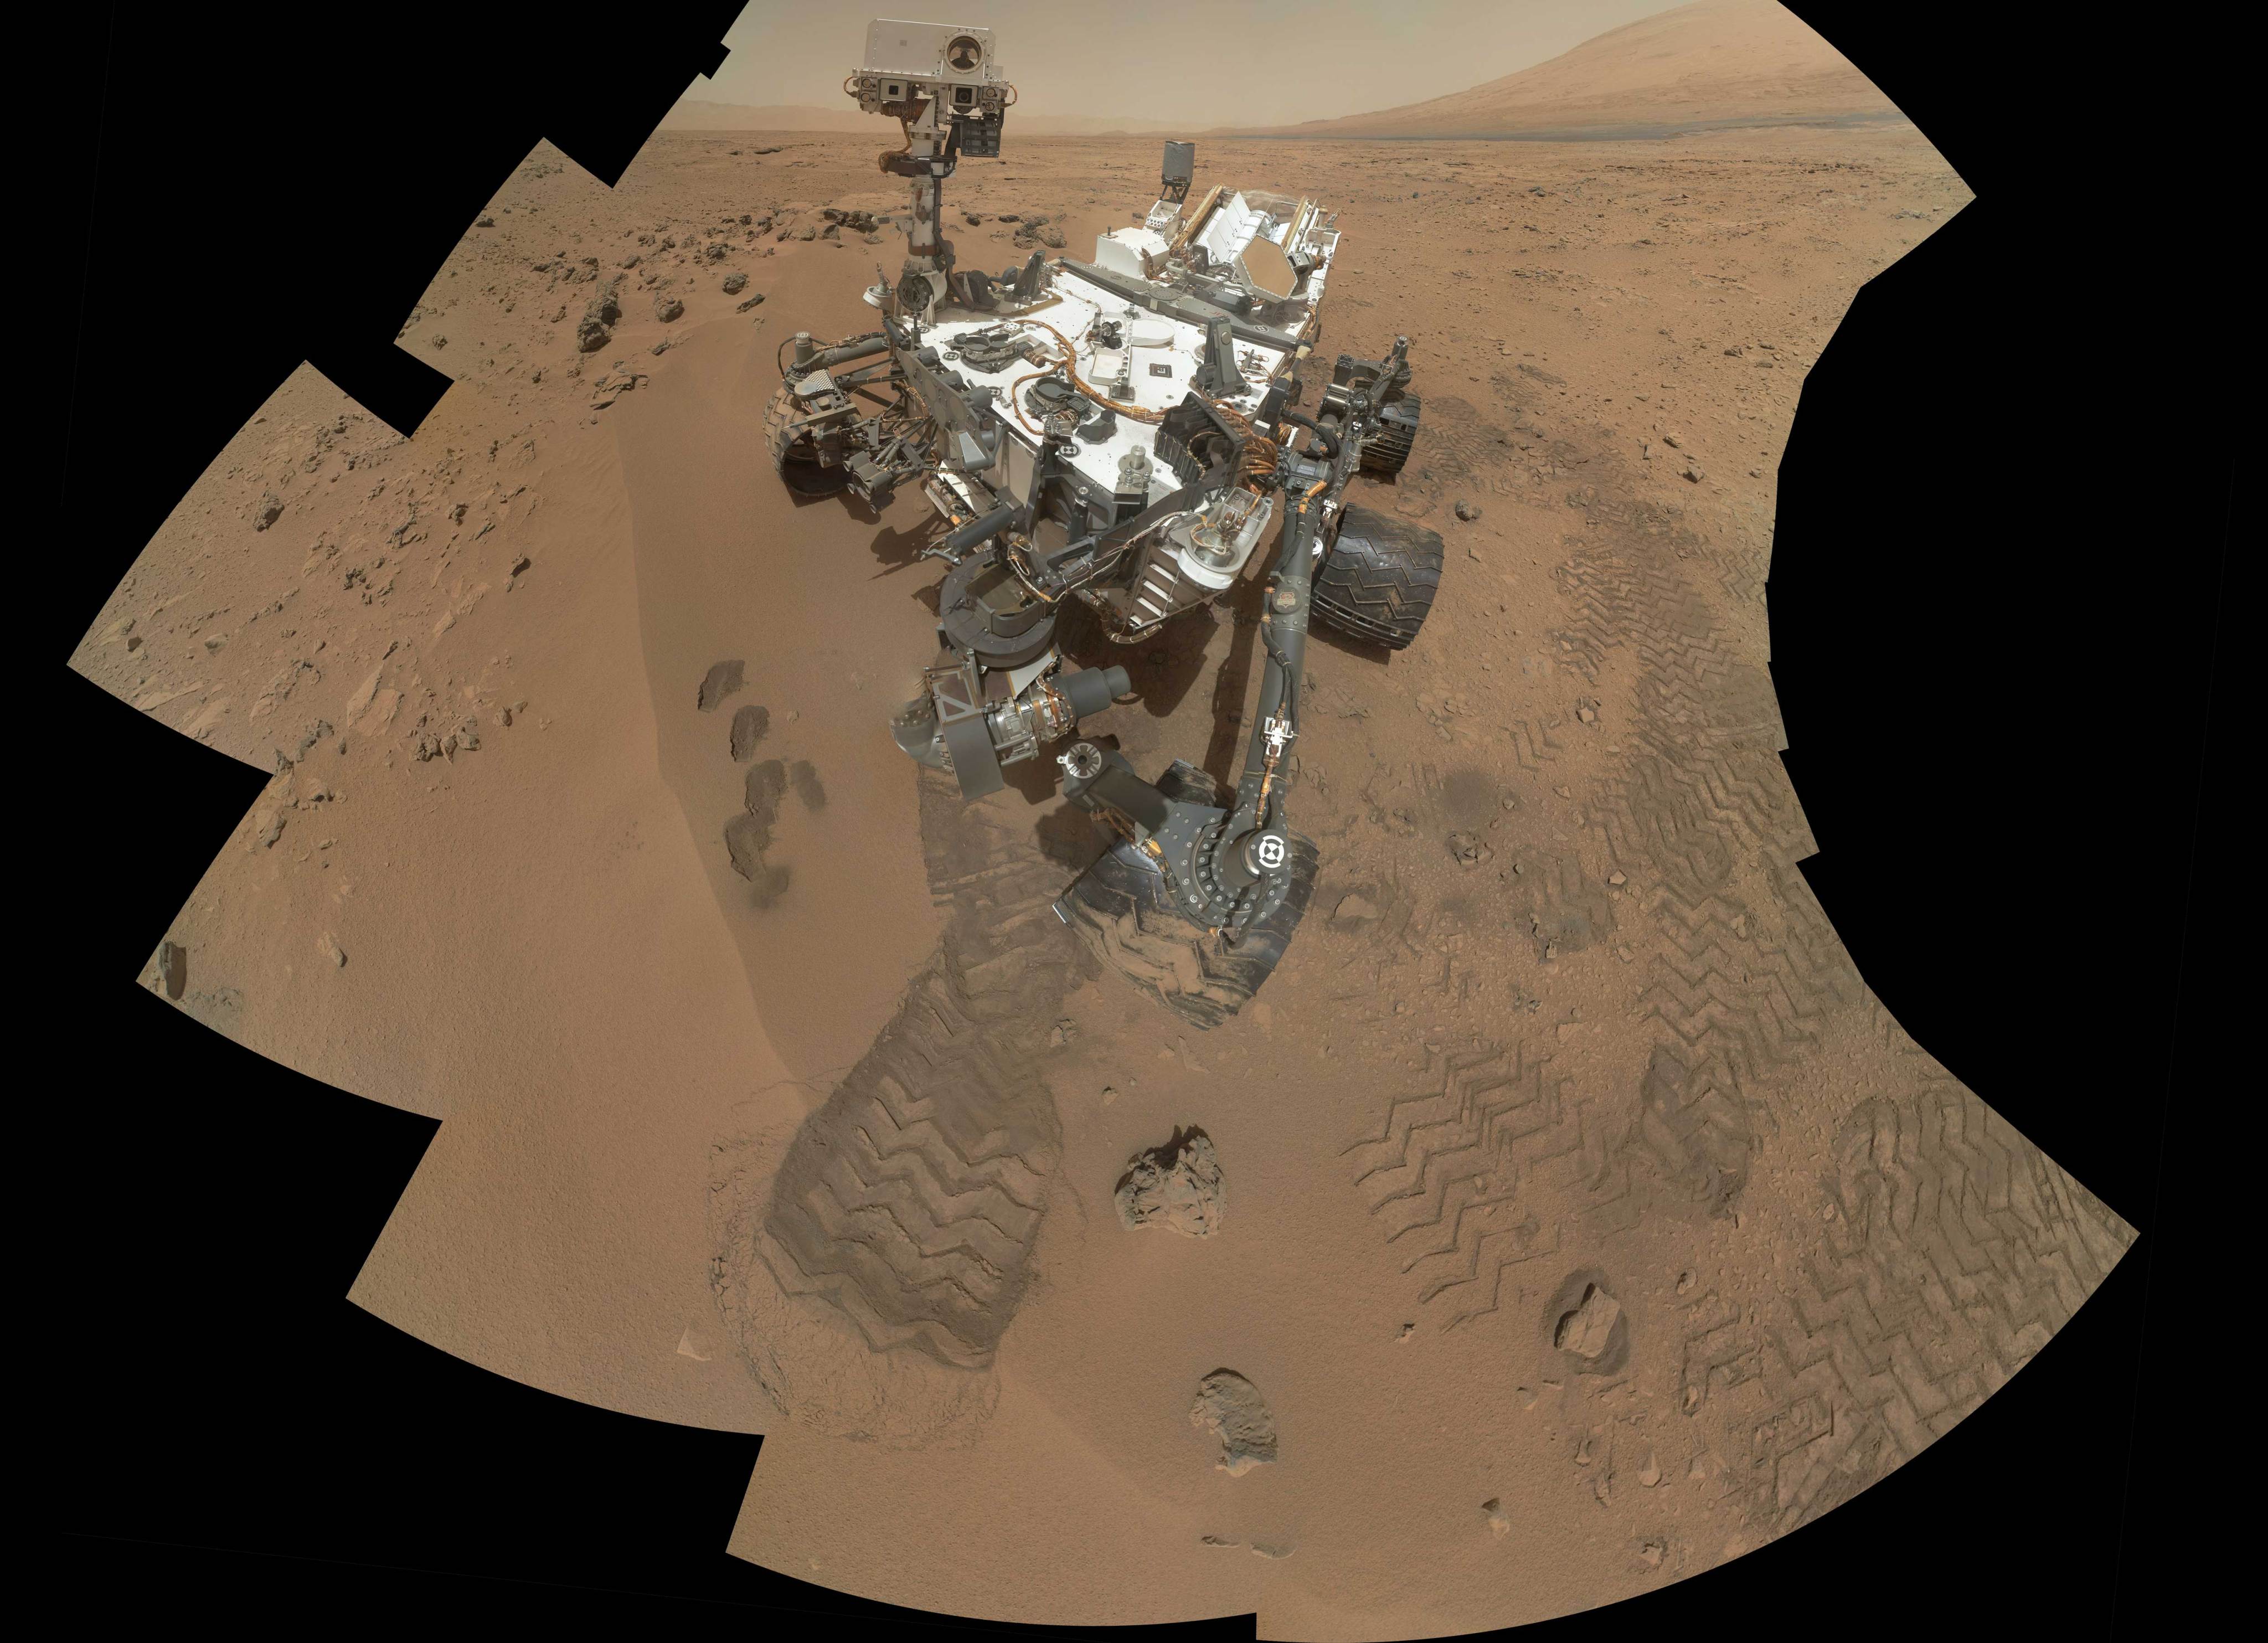 NASA's Curiosity Mars rover documented itself in the context of its work site, an area called "Rocknest Wind Drift," on the 84th Martian day, or sol, of its mission (Oct. 31, 2012).